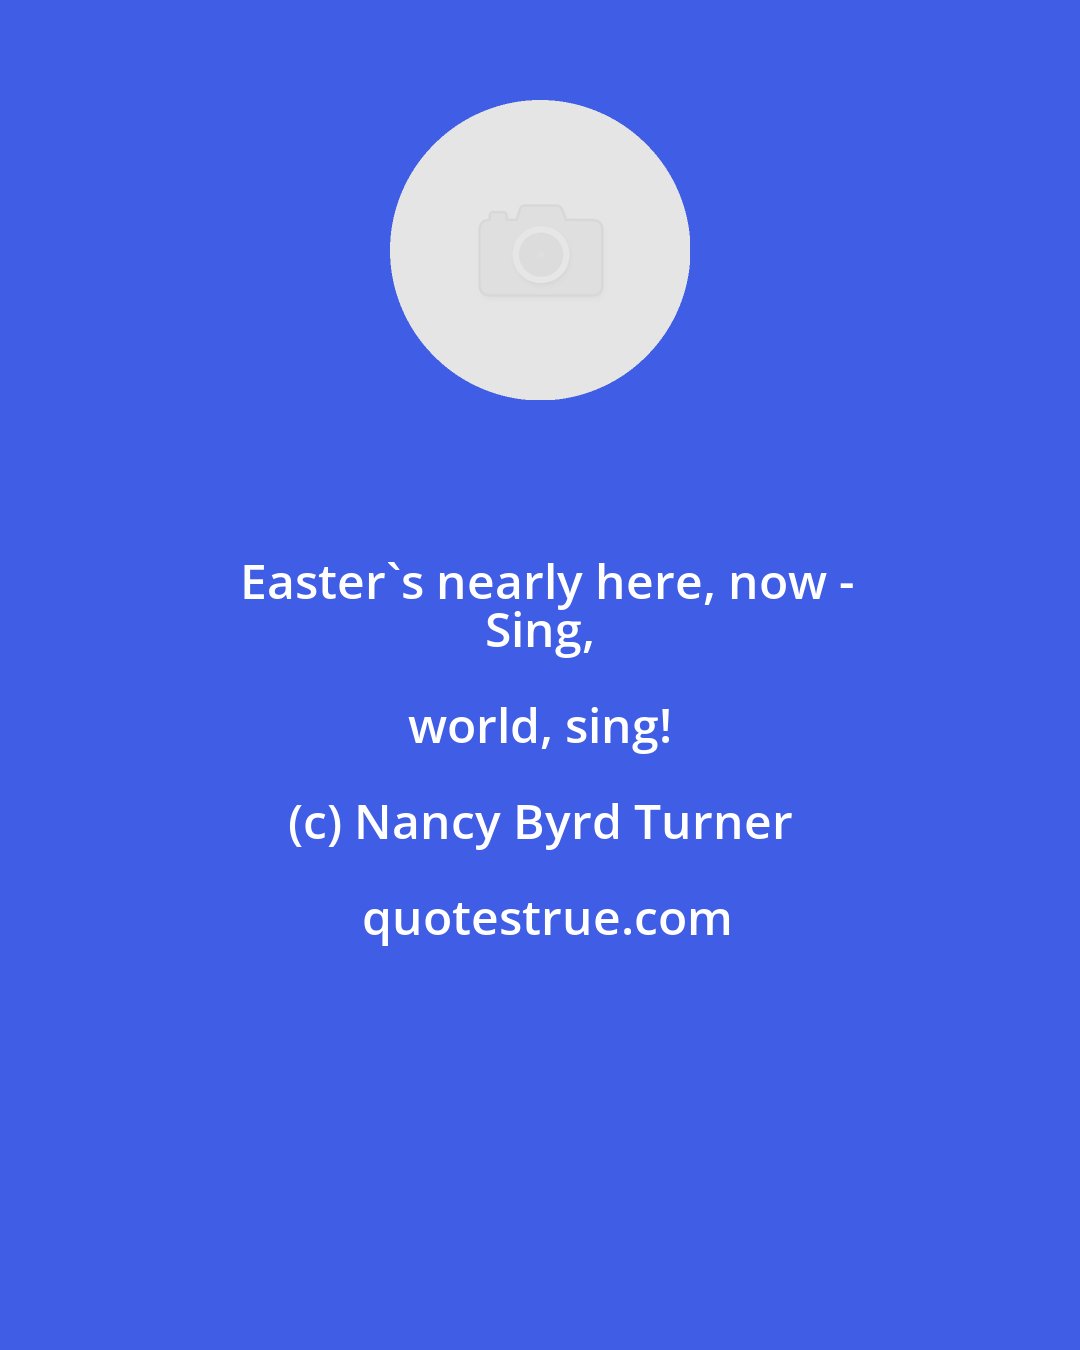 Nancy Byrd Turner: Easter's nearly here, now -
 Sing, world, sing!